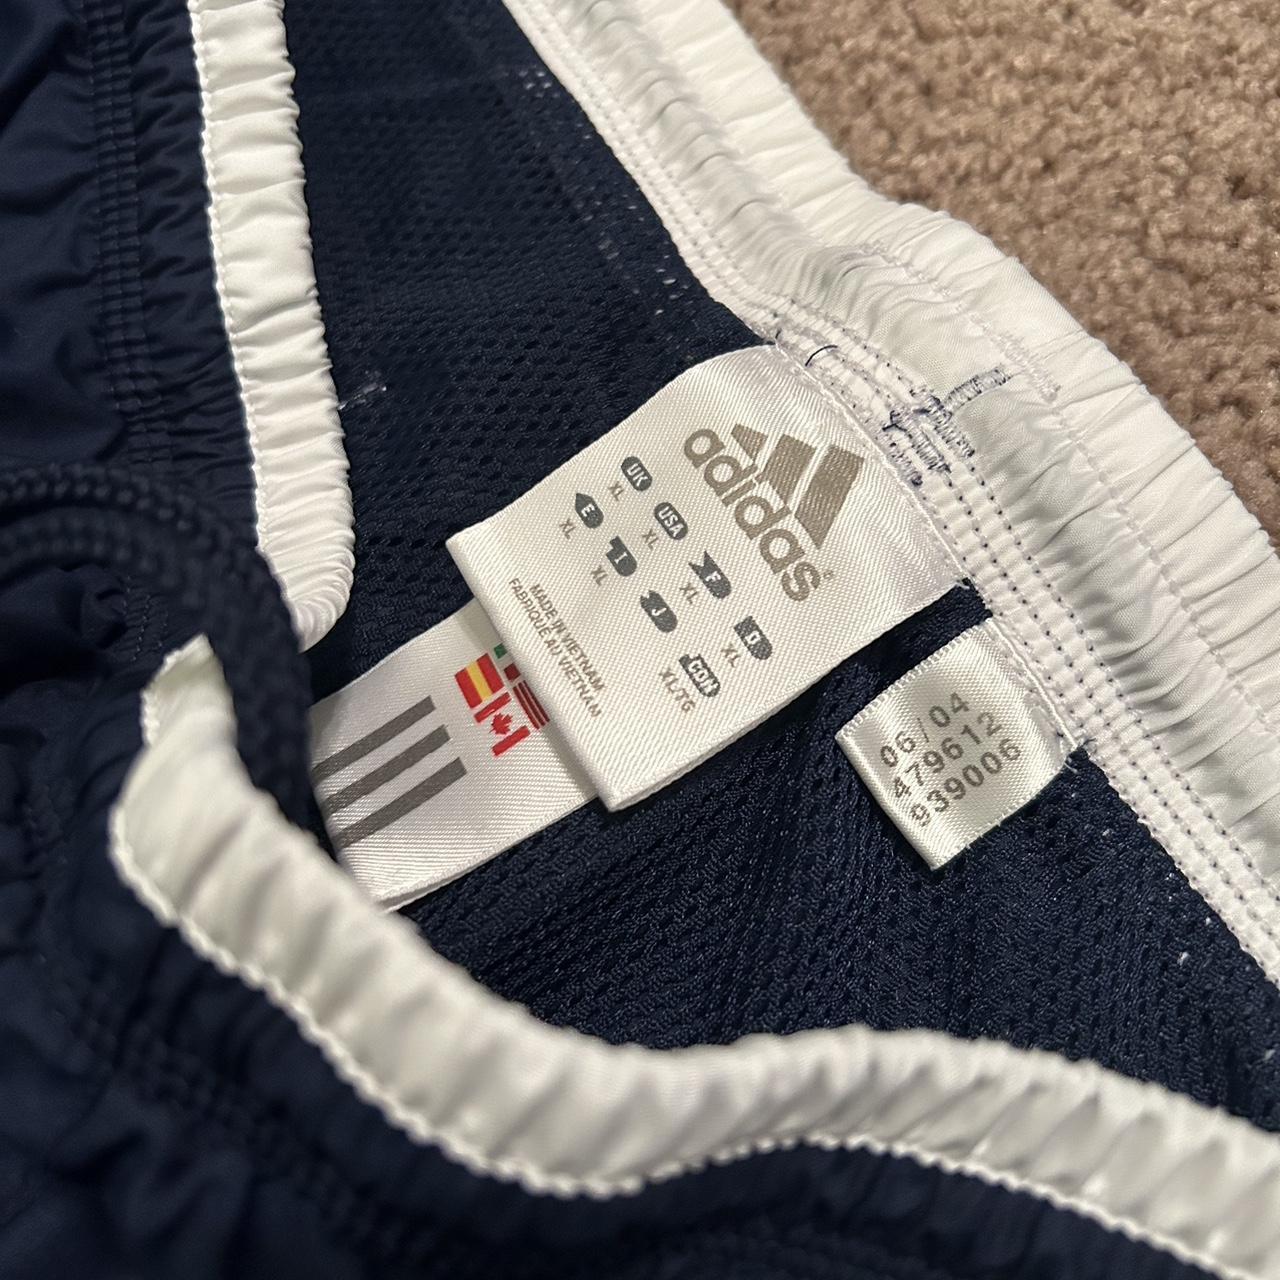 Adidas Men's Navy and White Joggers-tracksuits (4)